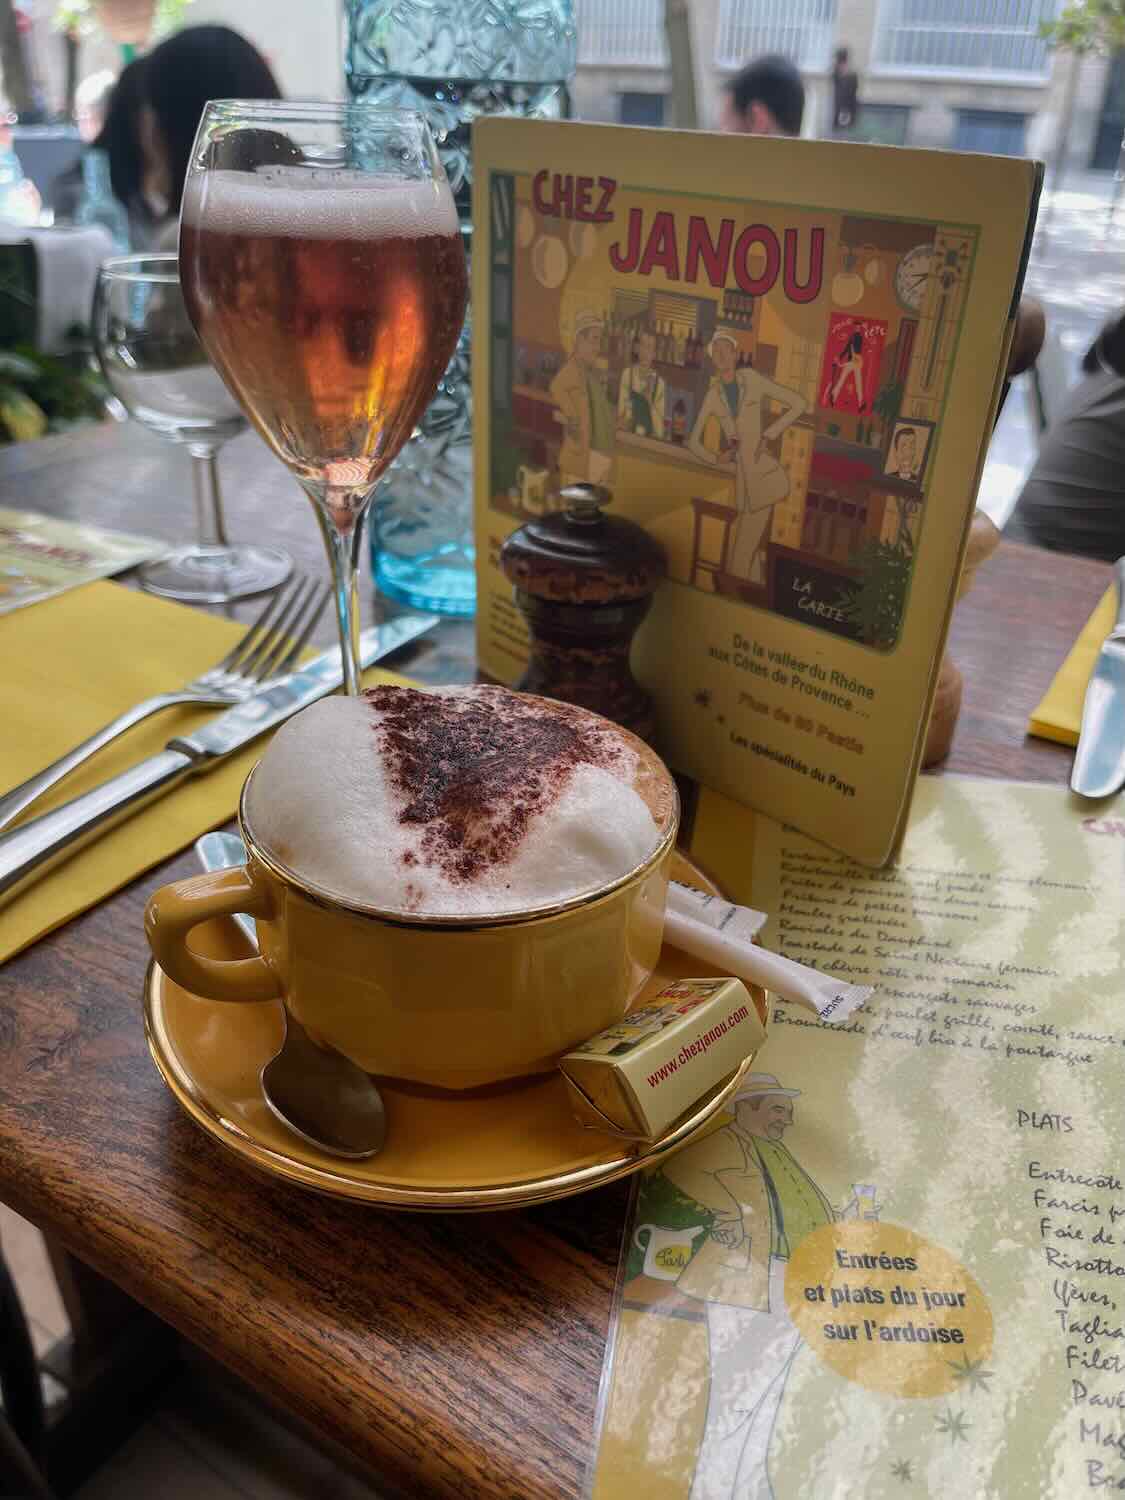 A table setting at Chez Janou featuring a cappuccino with a heart-shaped design in the foam and a glass of rosé, accompanied by a colorful menu, creating a cozy and welcoming dining experience.